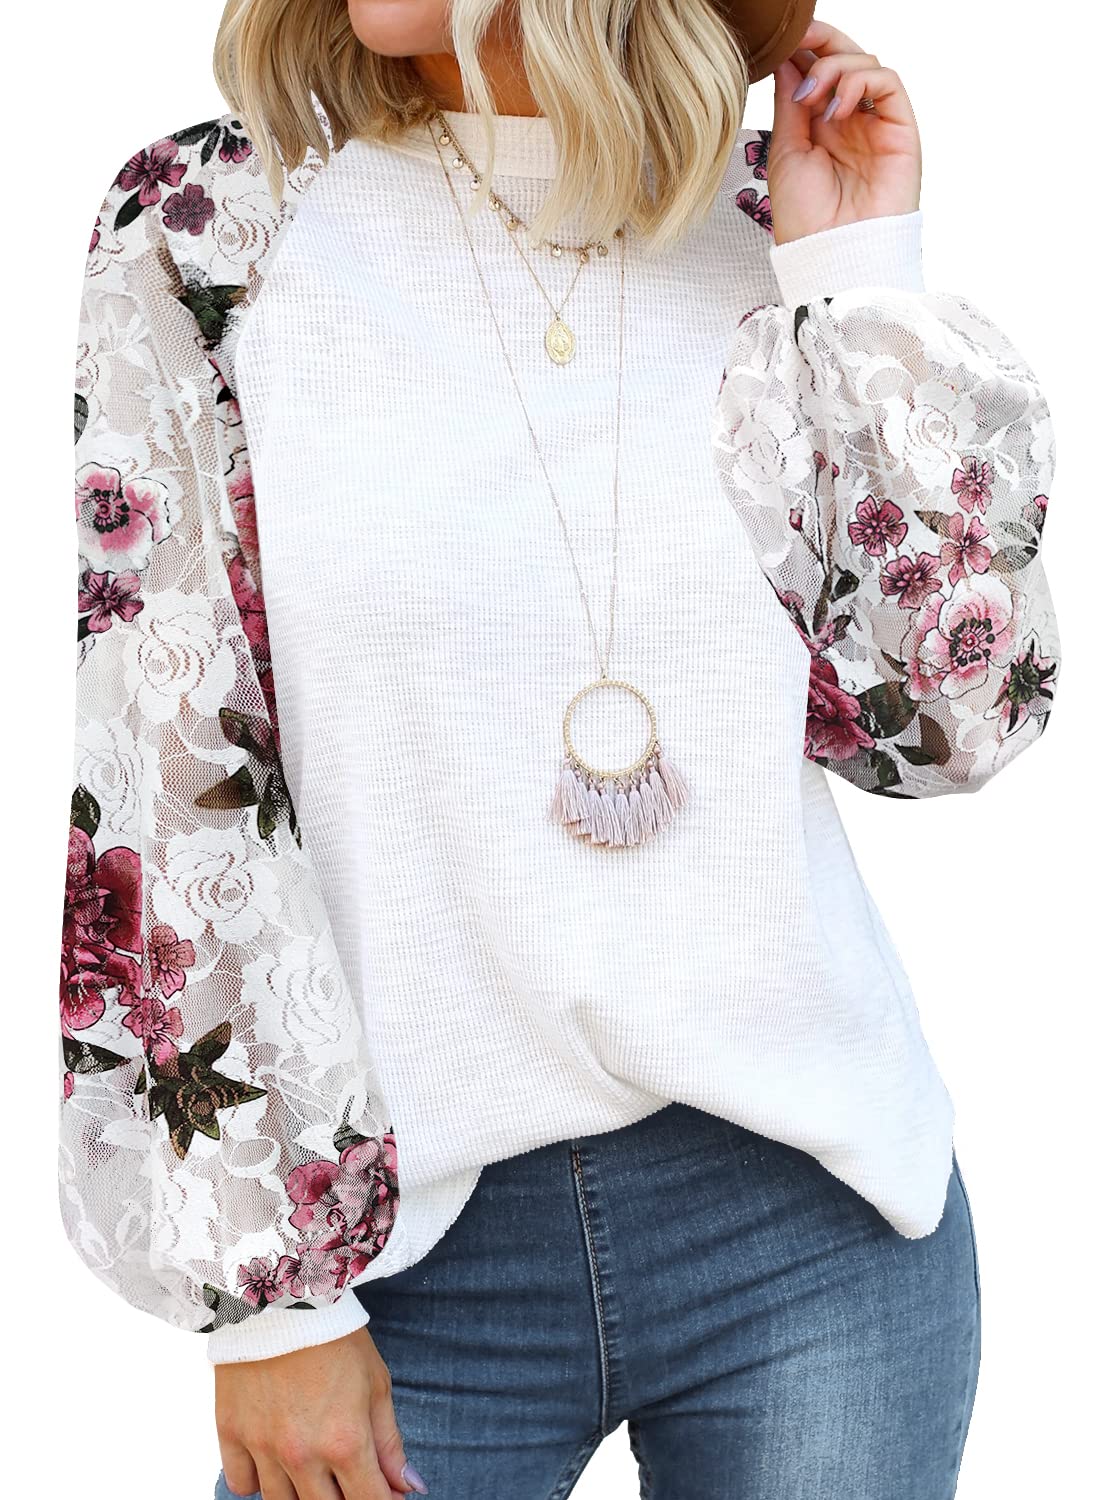 MIHOLL Womens Lace Long Sleeve Tops Floral Print Casual Shirts Blouses